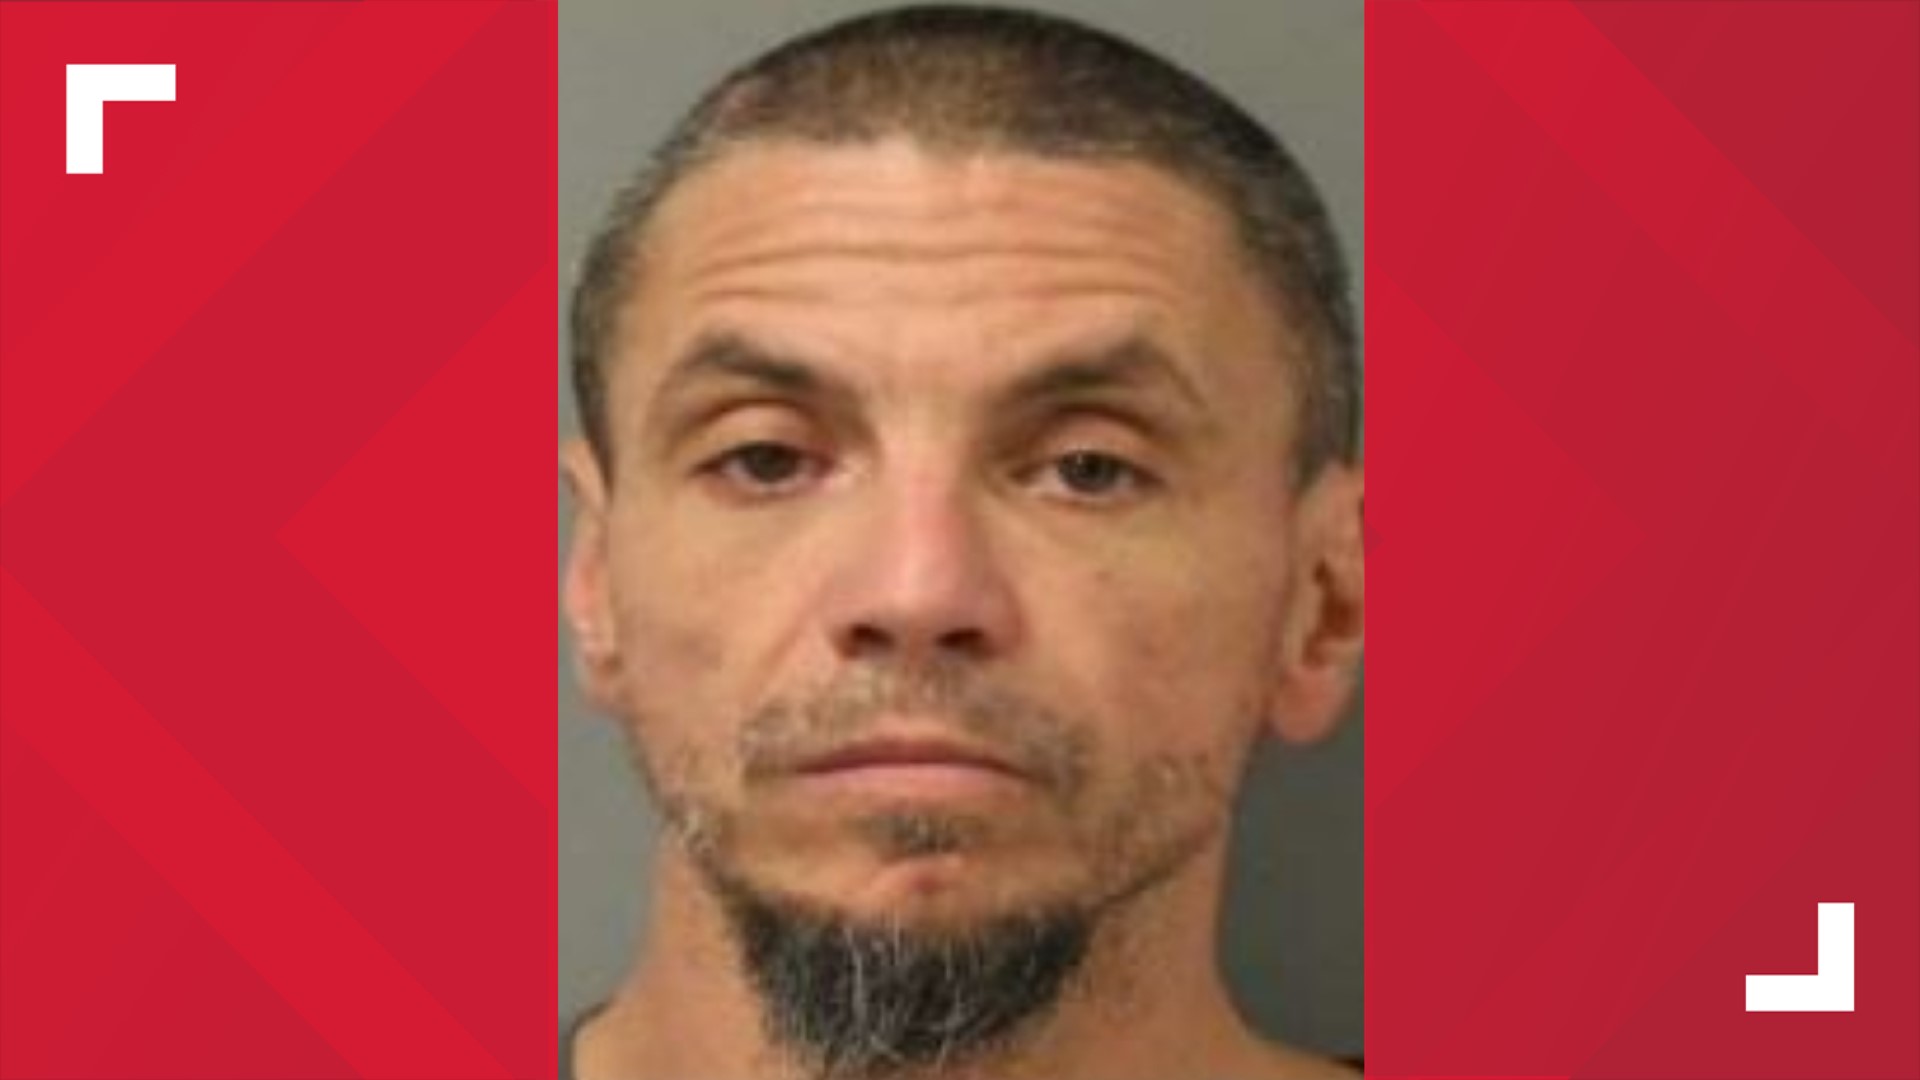 49-year-old Lewis E. Ayala is wanted for questioning in connection to a December homicide.